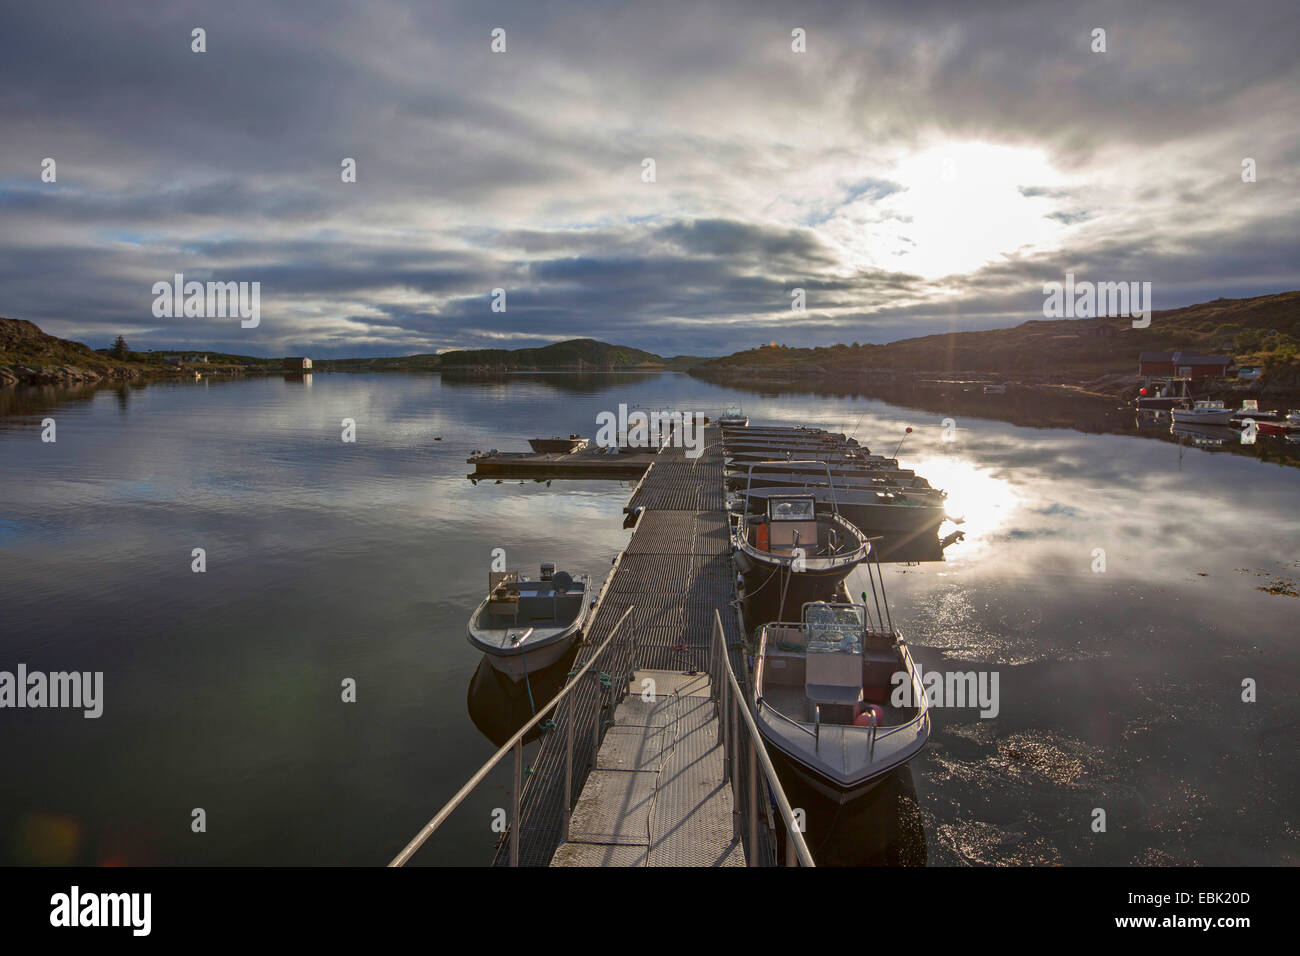 landing stage with motorboats at sunrise, Norway, Hitra Stock Photo